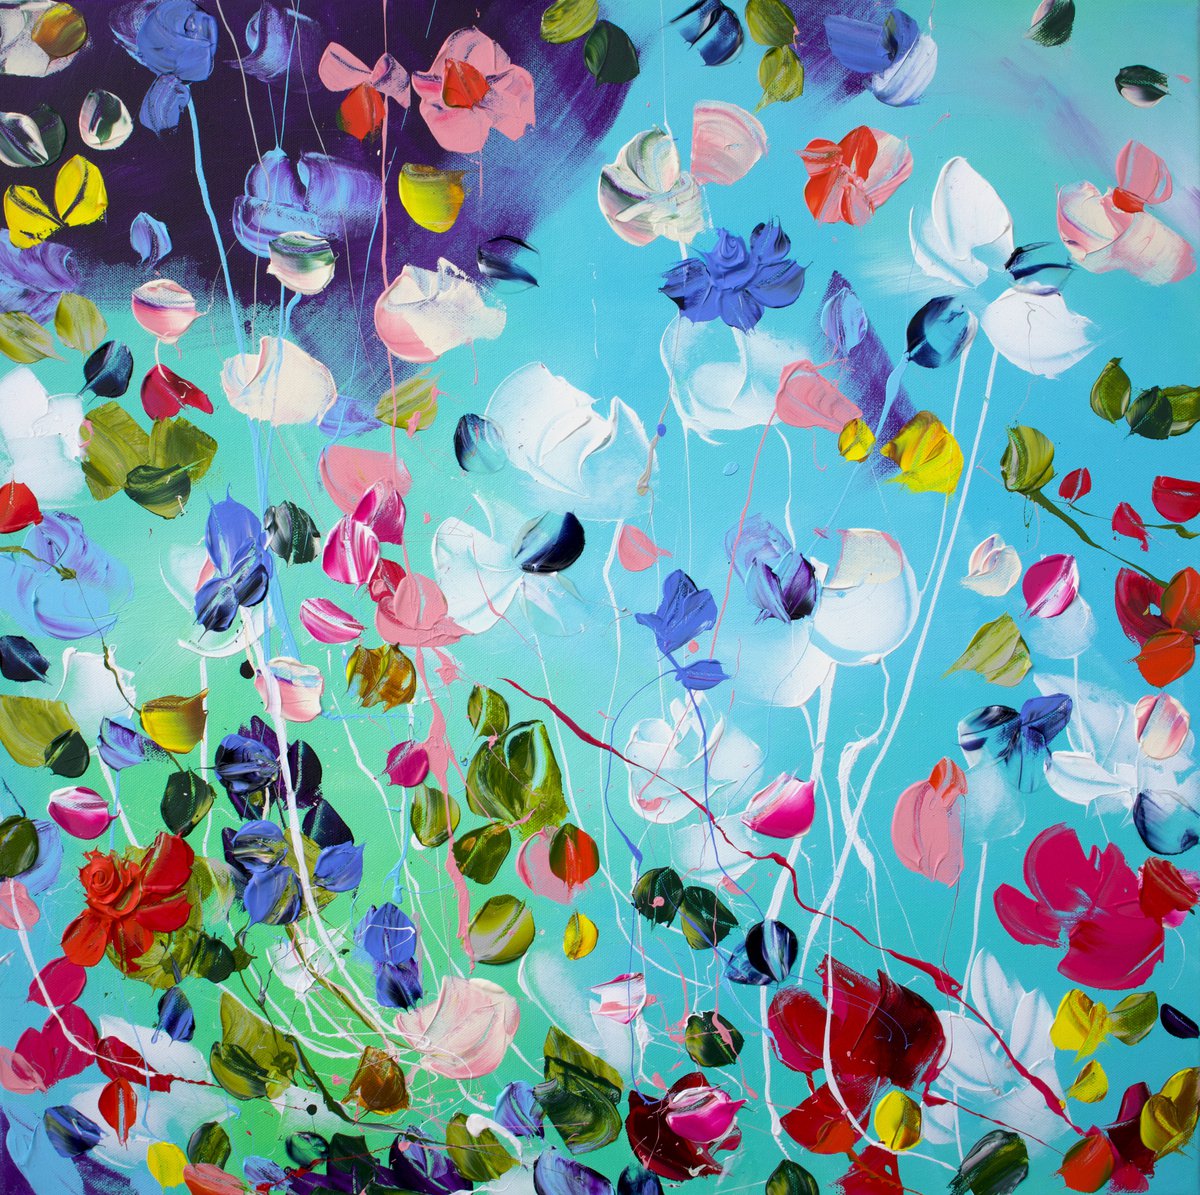 Structure impasto acrylic painting with abstract flowers 60x60cm August by Anastassia Skopp